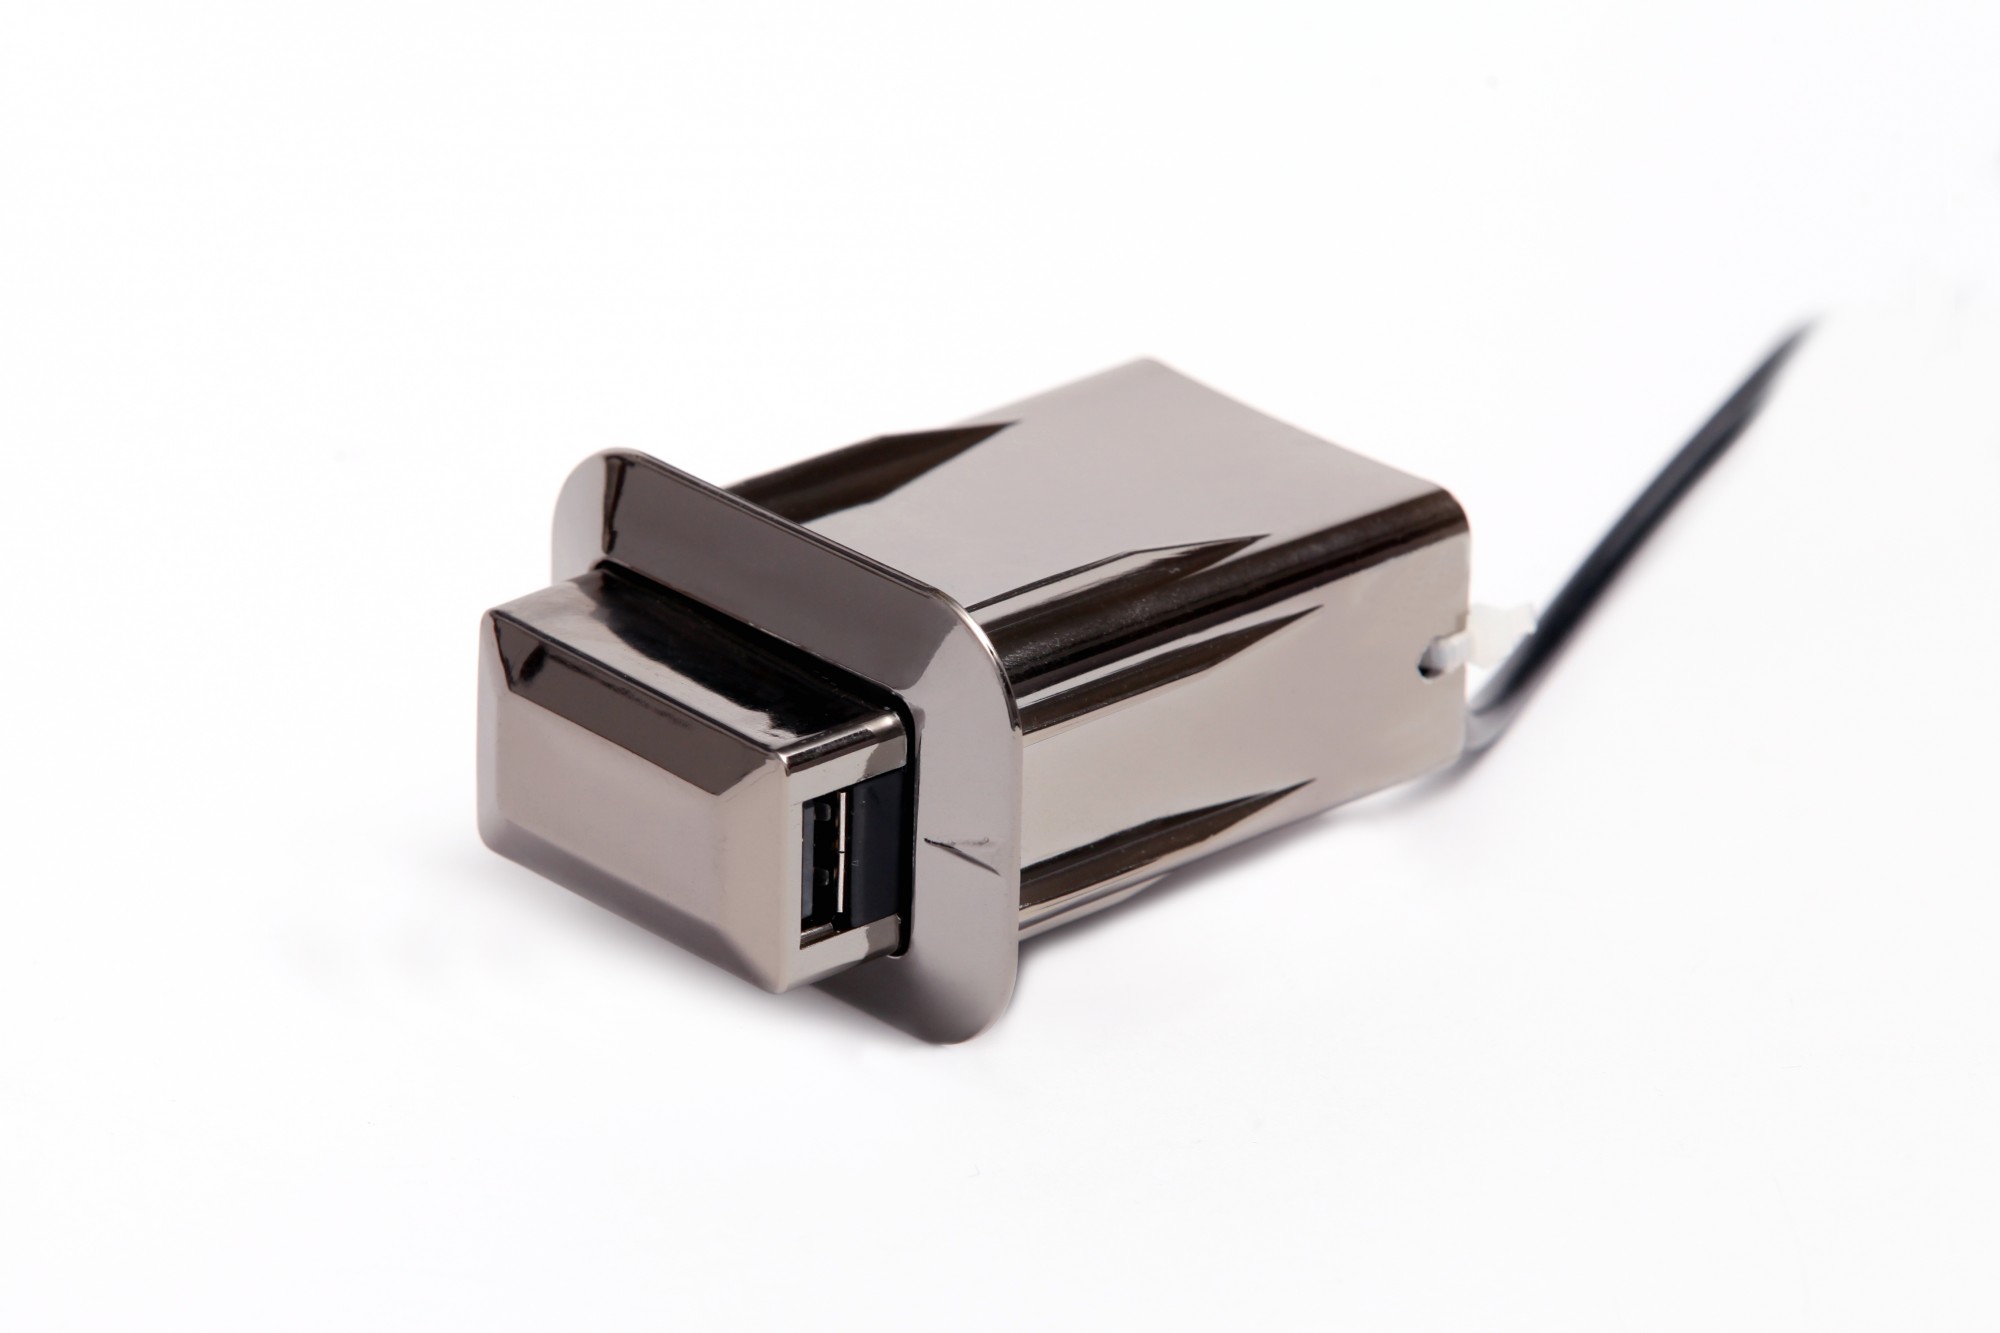 Pop-Up Rectangular Dual Port USB Charger in Black Chrome